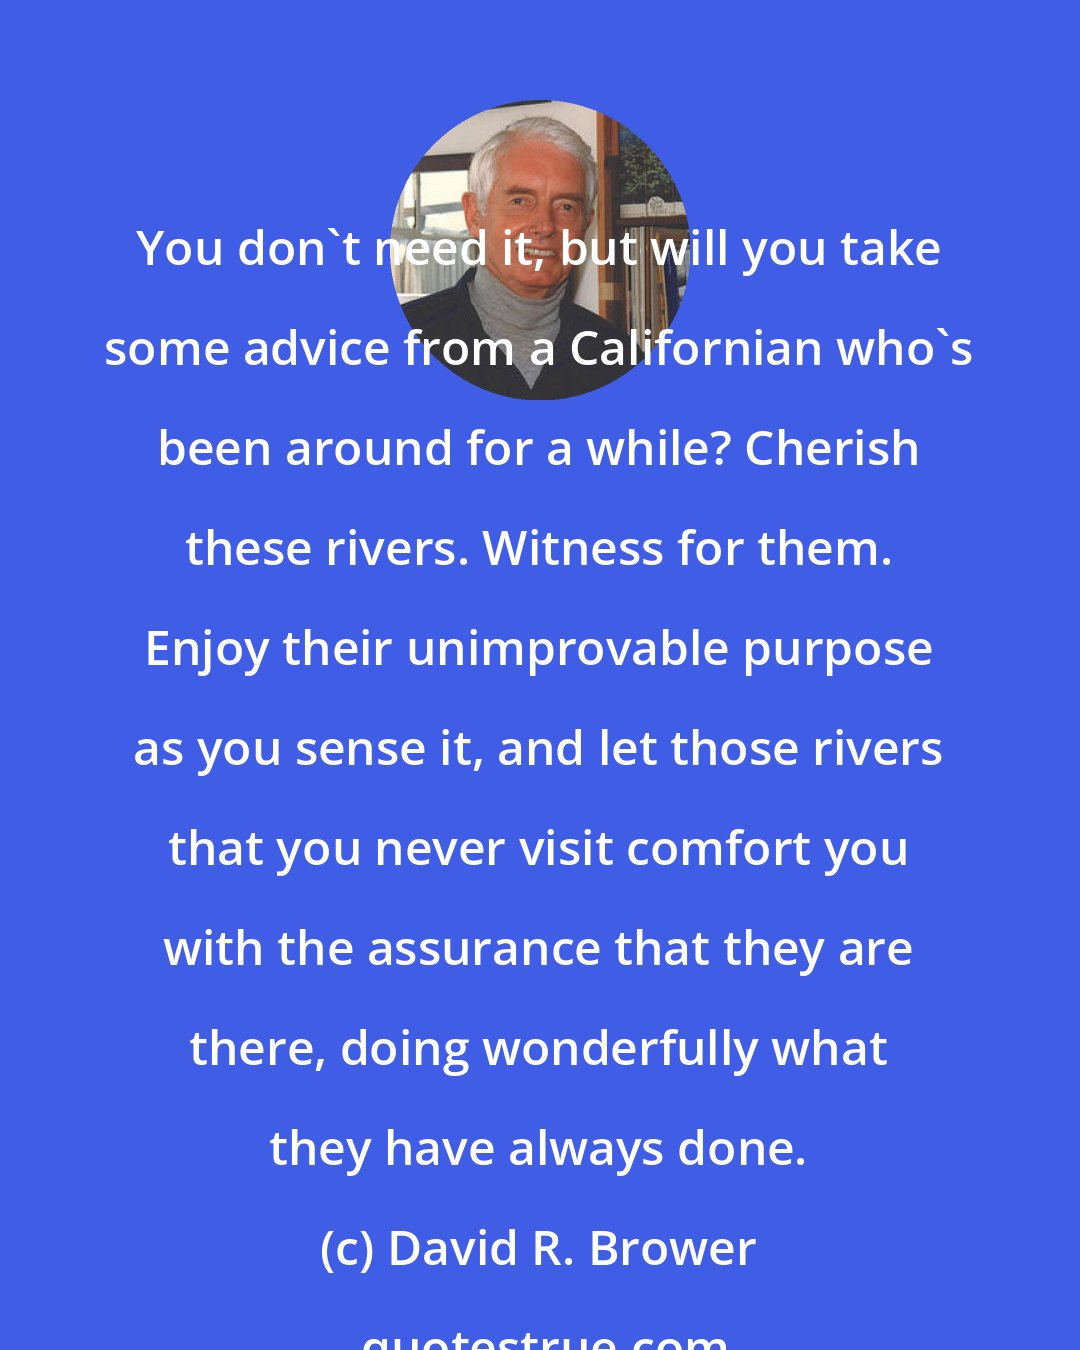 David R. Brower: You don't need it, but will you take some advice from a Californian who's been around for a while? Cherish these rivers. Witness for them. Enjoy their unimprovable purpose as you sense it, and let those rivers that you never visit comfort you with the assurance that they are there, doing wonderfully what they have always done.